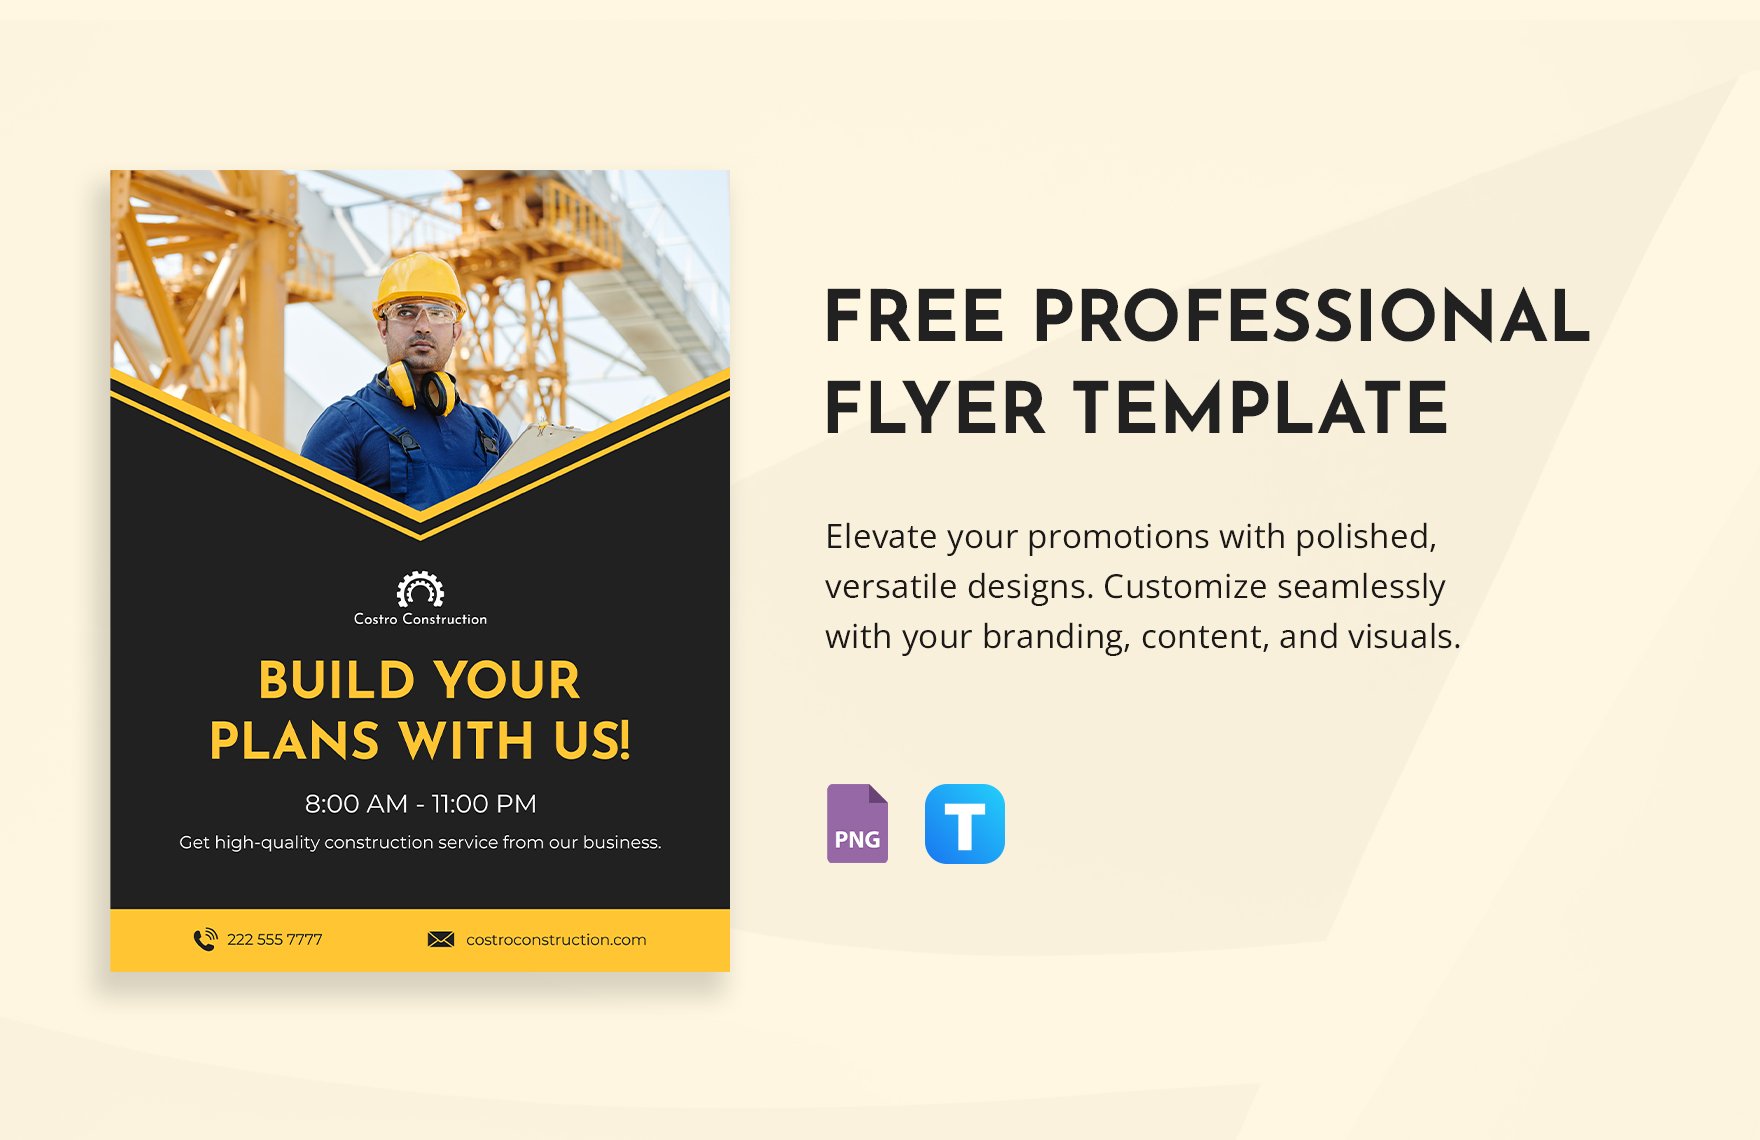 Free Professional Flyer Template